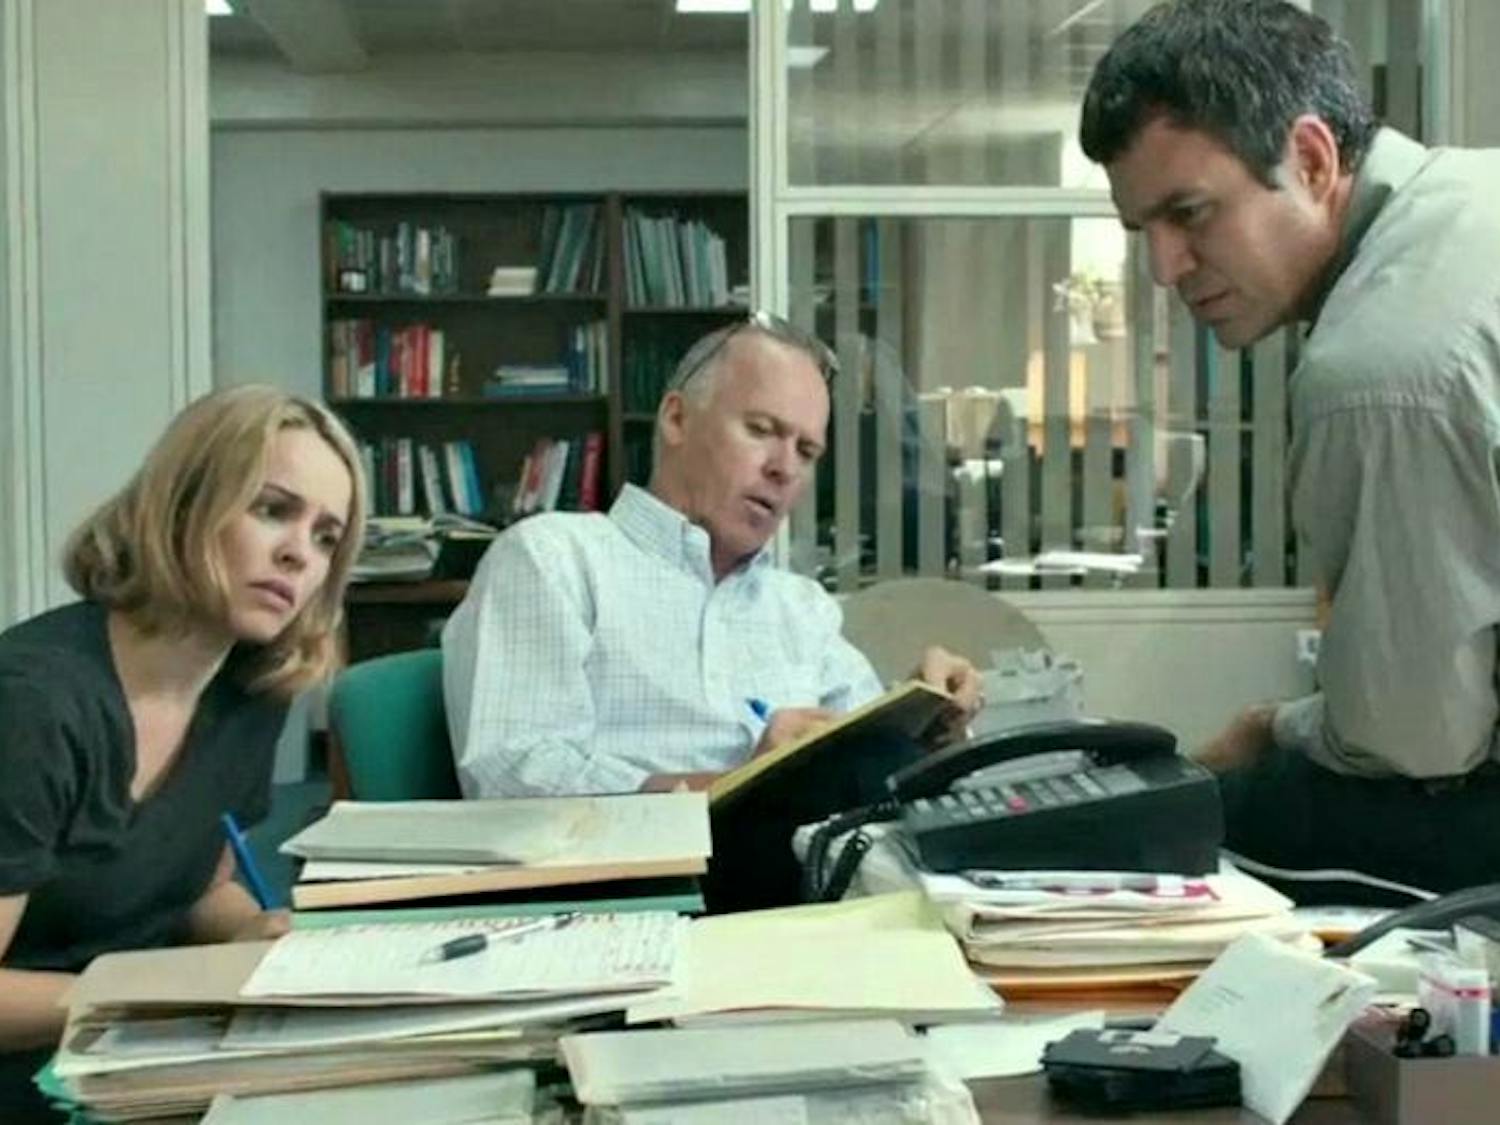 "Spotlight" stunned audiences last year with its depiction of the Boston Globe Spotlight team that exposed child sex abuse within the Boston Catholic Church.&nbsp;